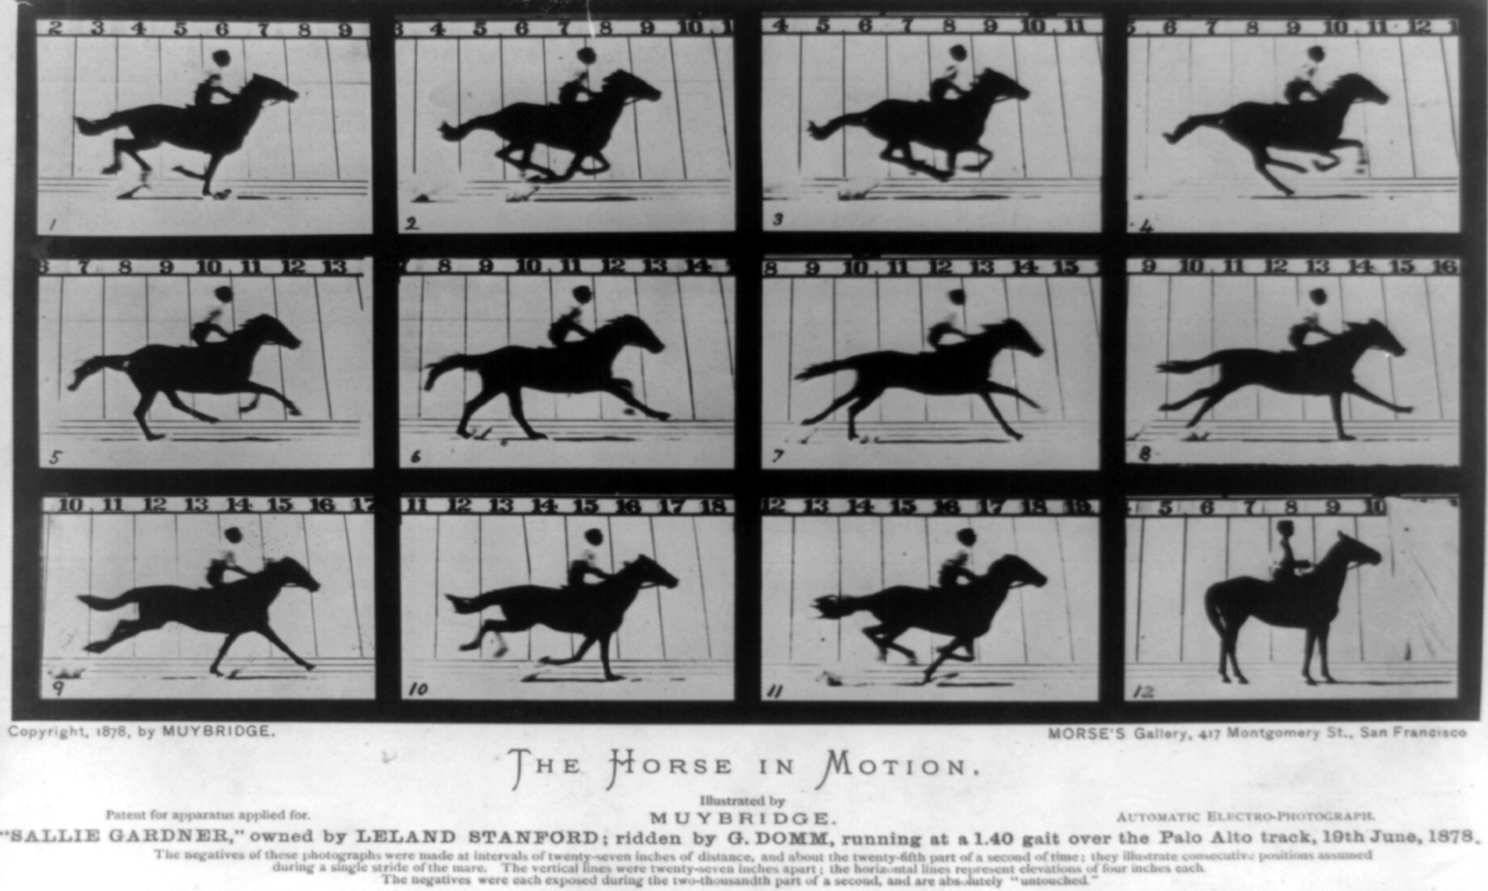 The Horse in Motion: Photographs of the horse “Sally Gardner”running at a gallop, June 19, 1878.